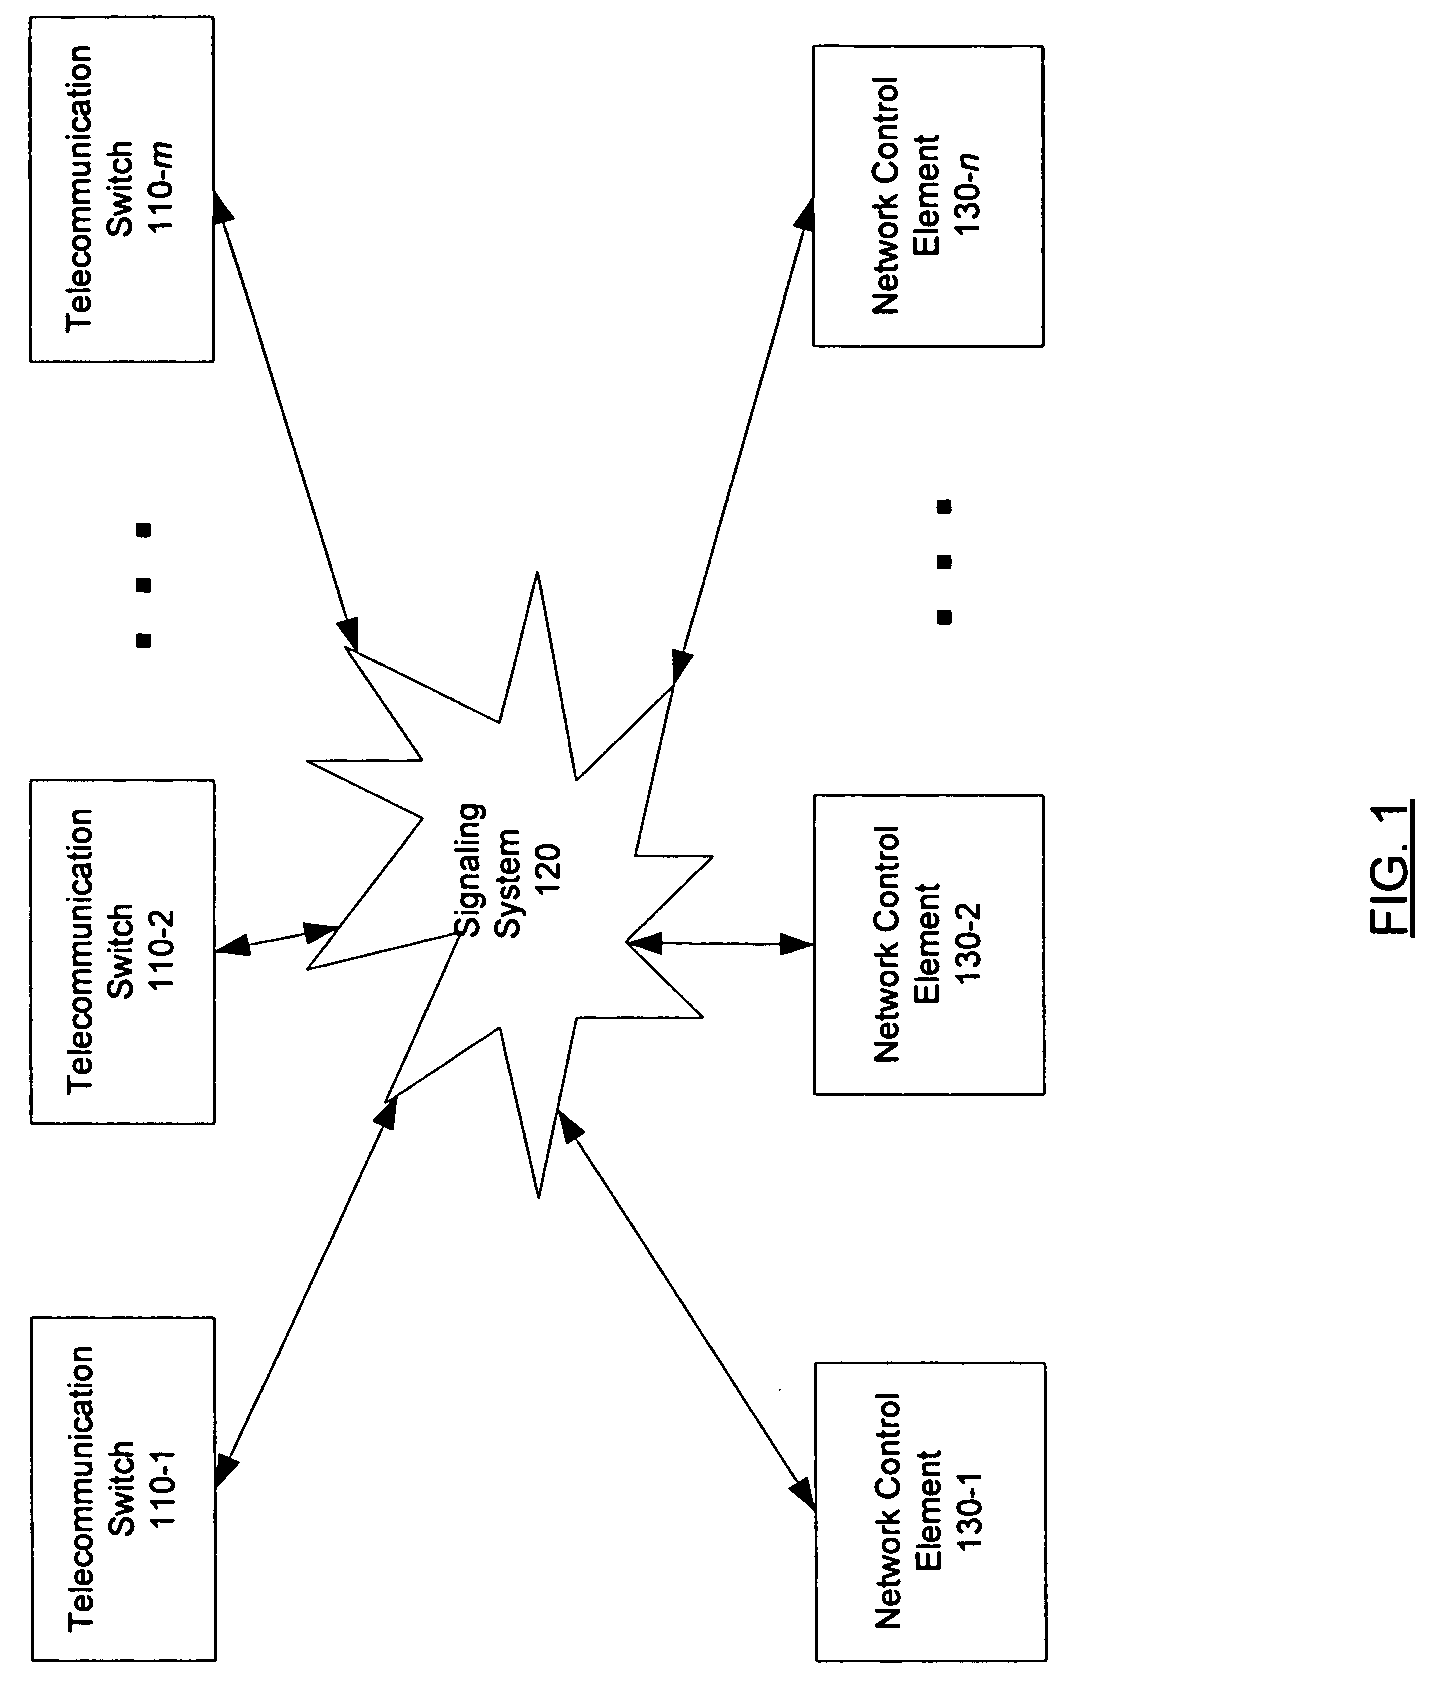 System and method for providing high reliability network